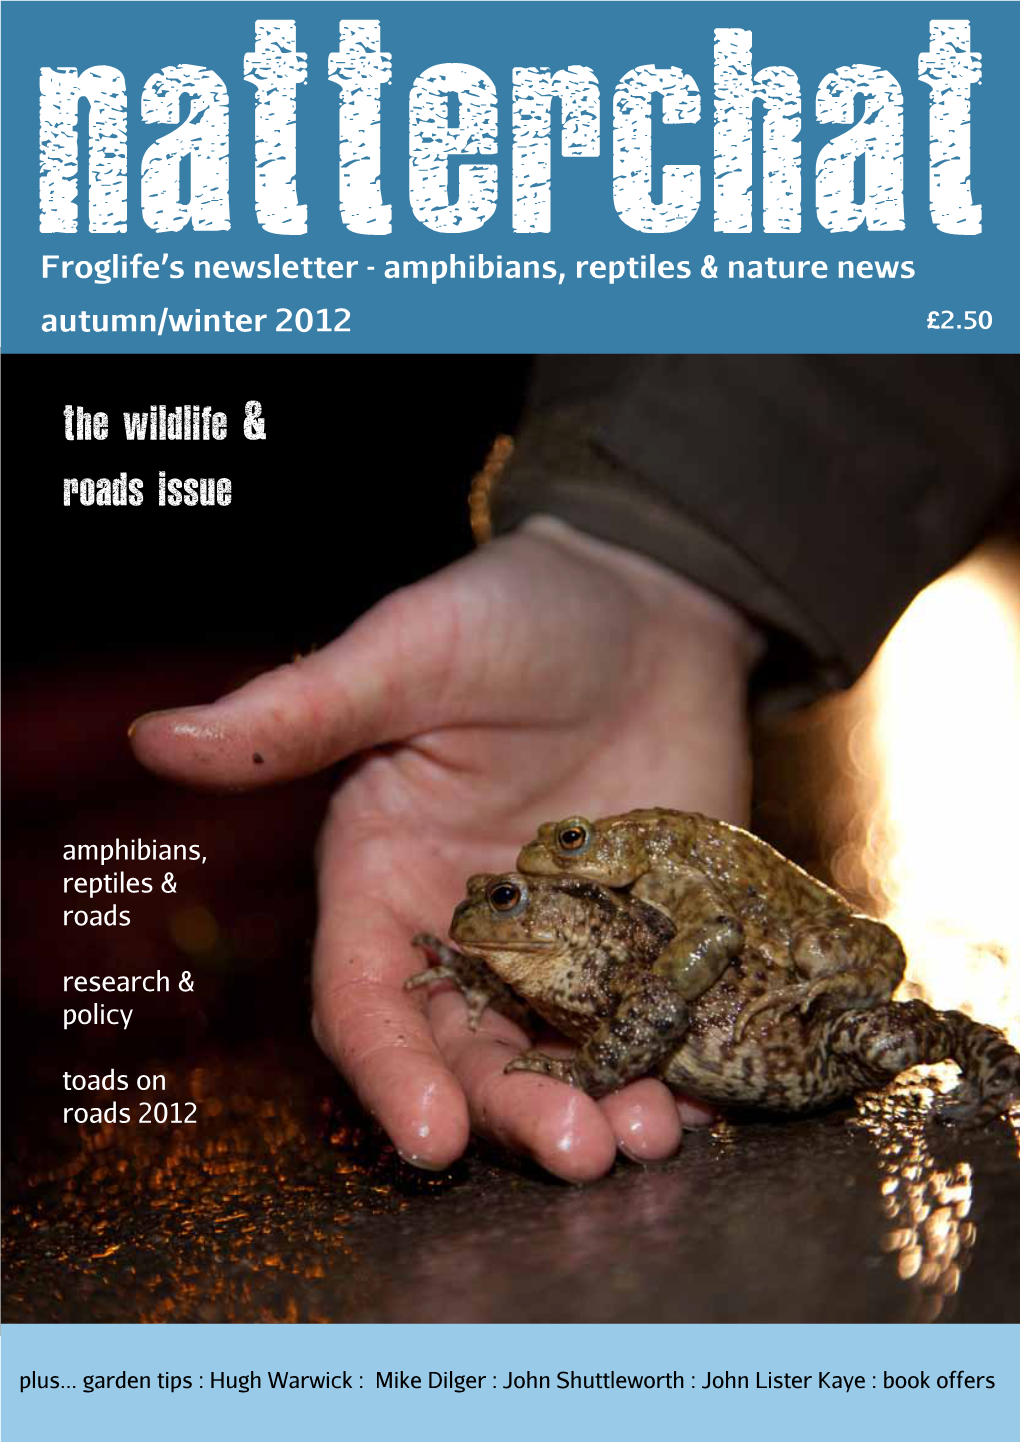 The Wildlife & Roads Issue